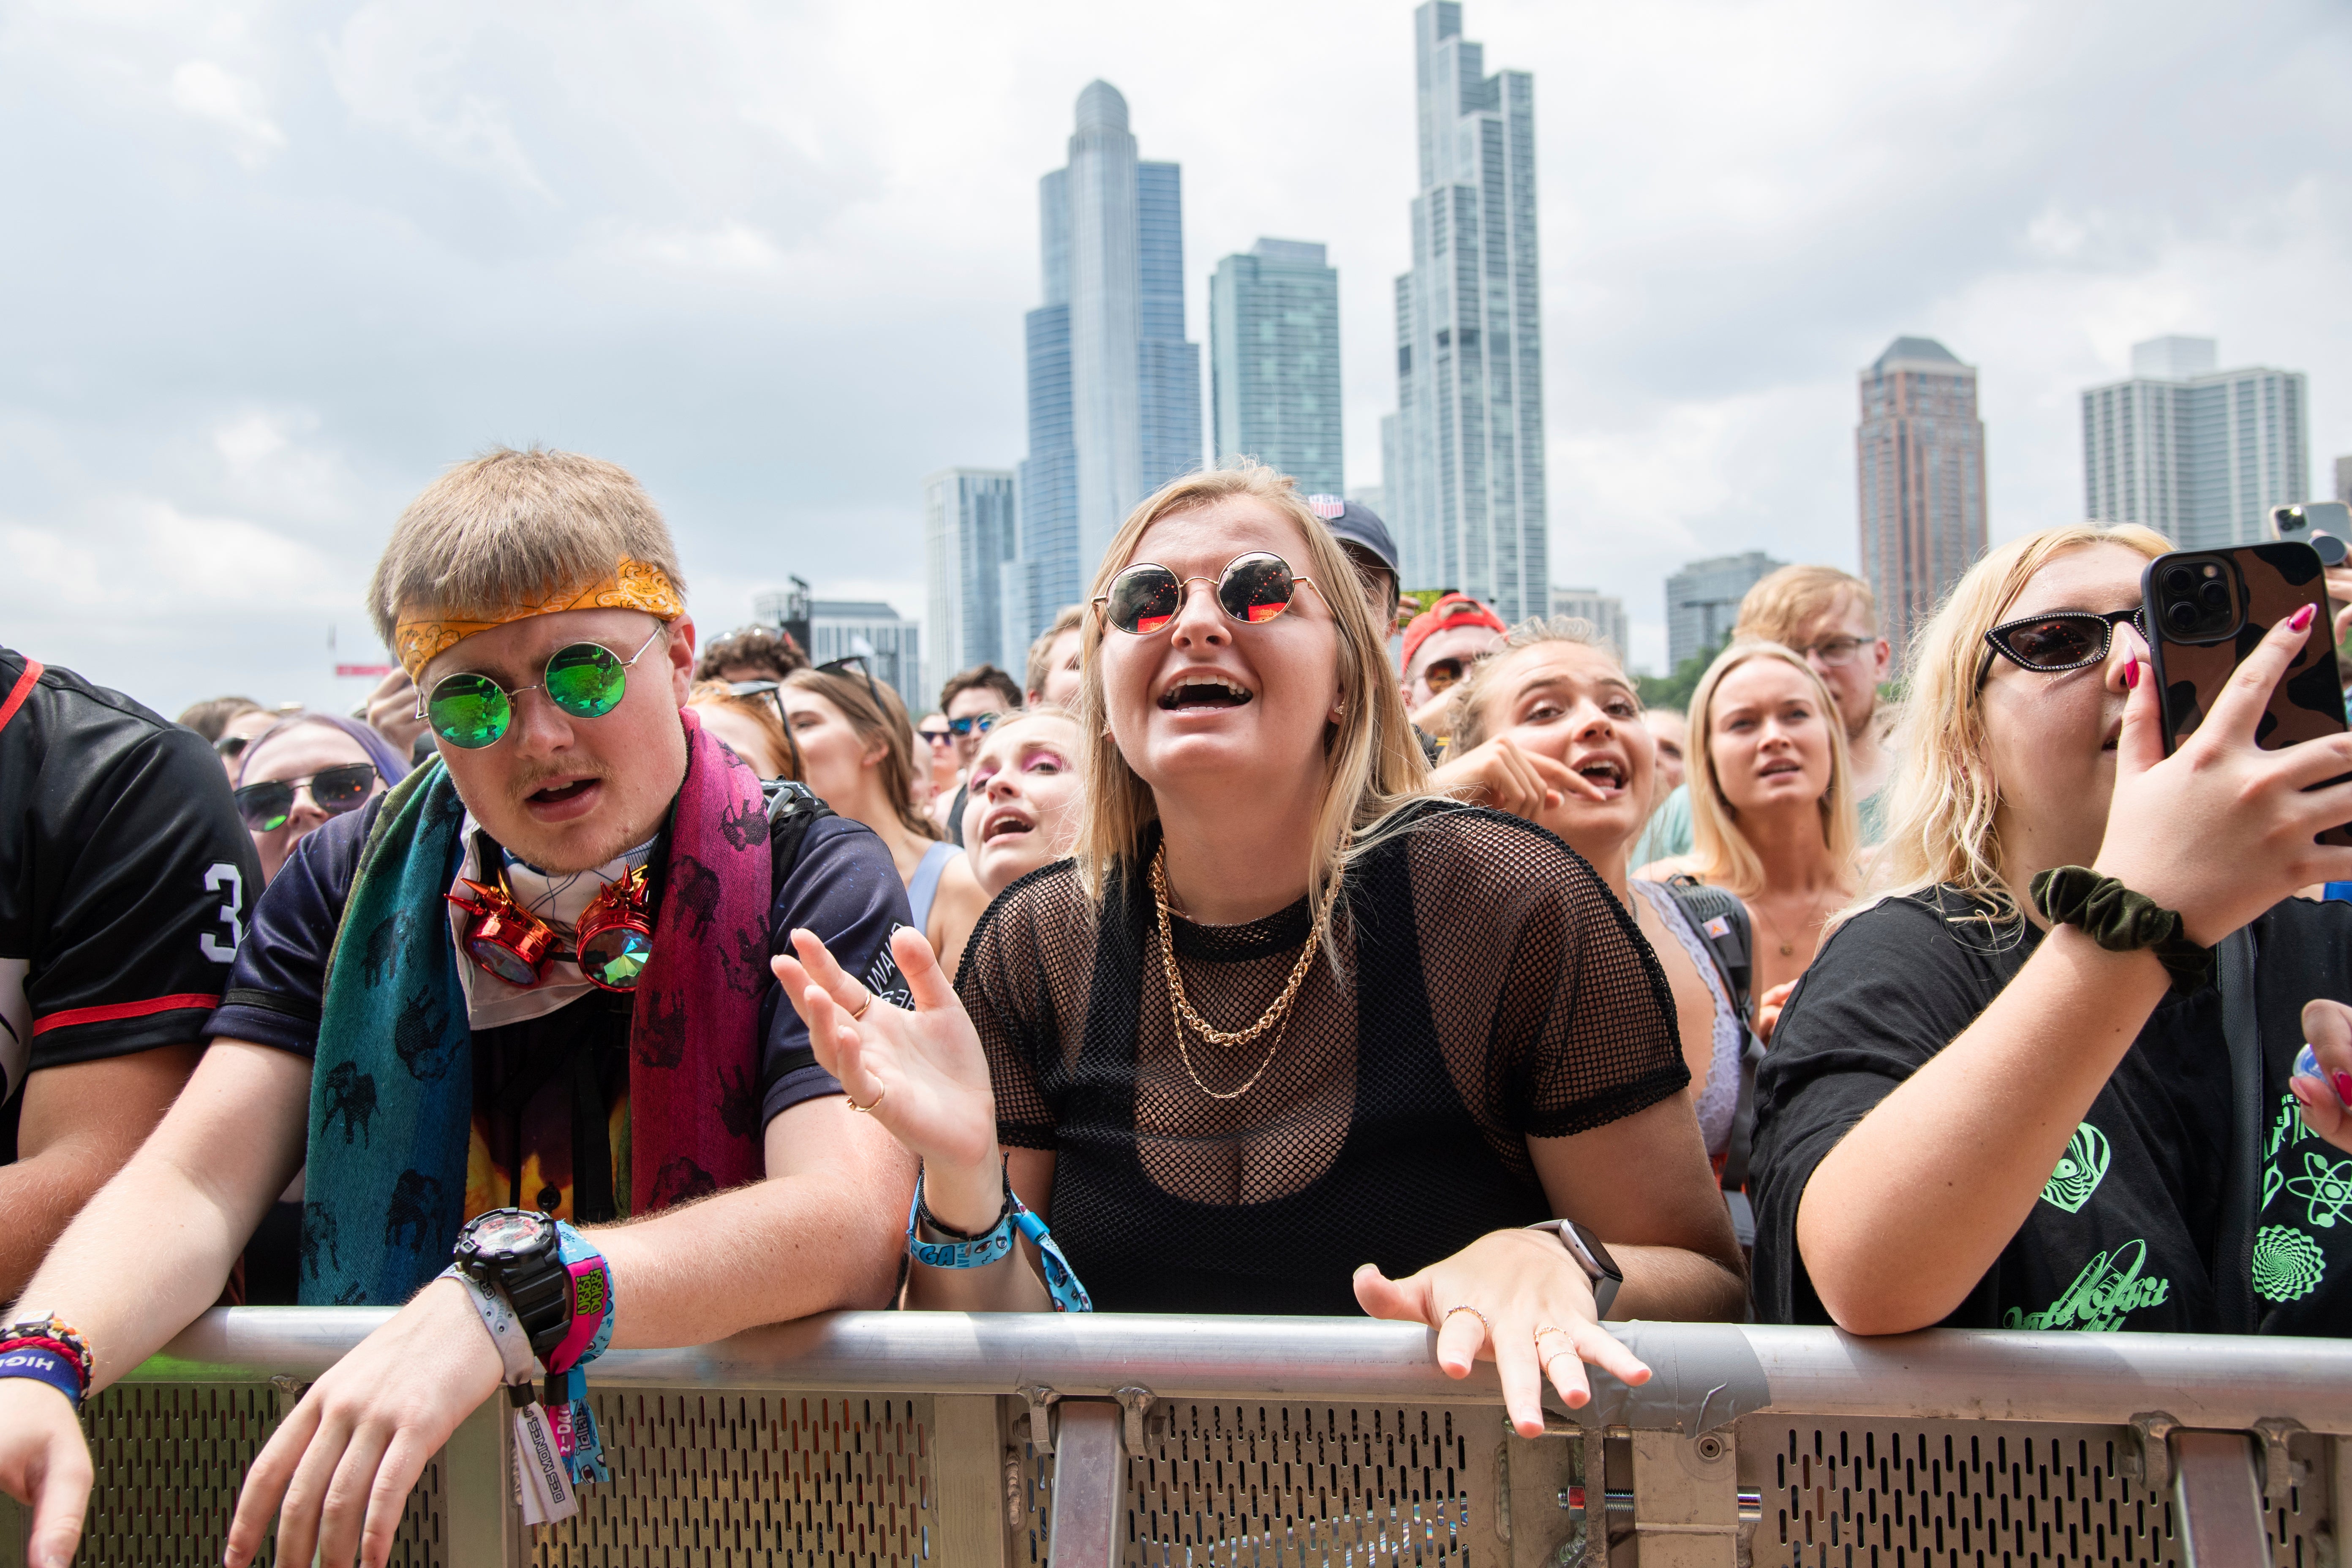 Thousands of concertgoers gather at Lollapalooza in Grant Park, Chicago